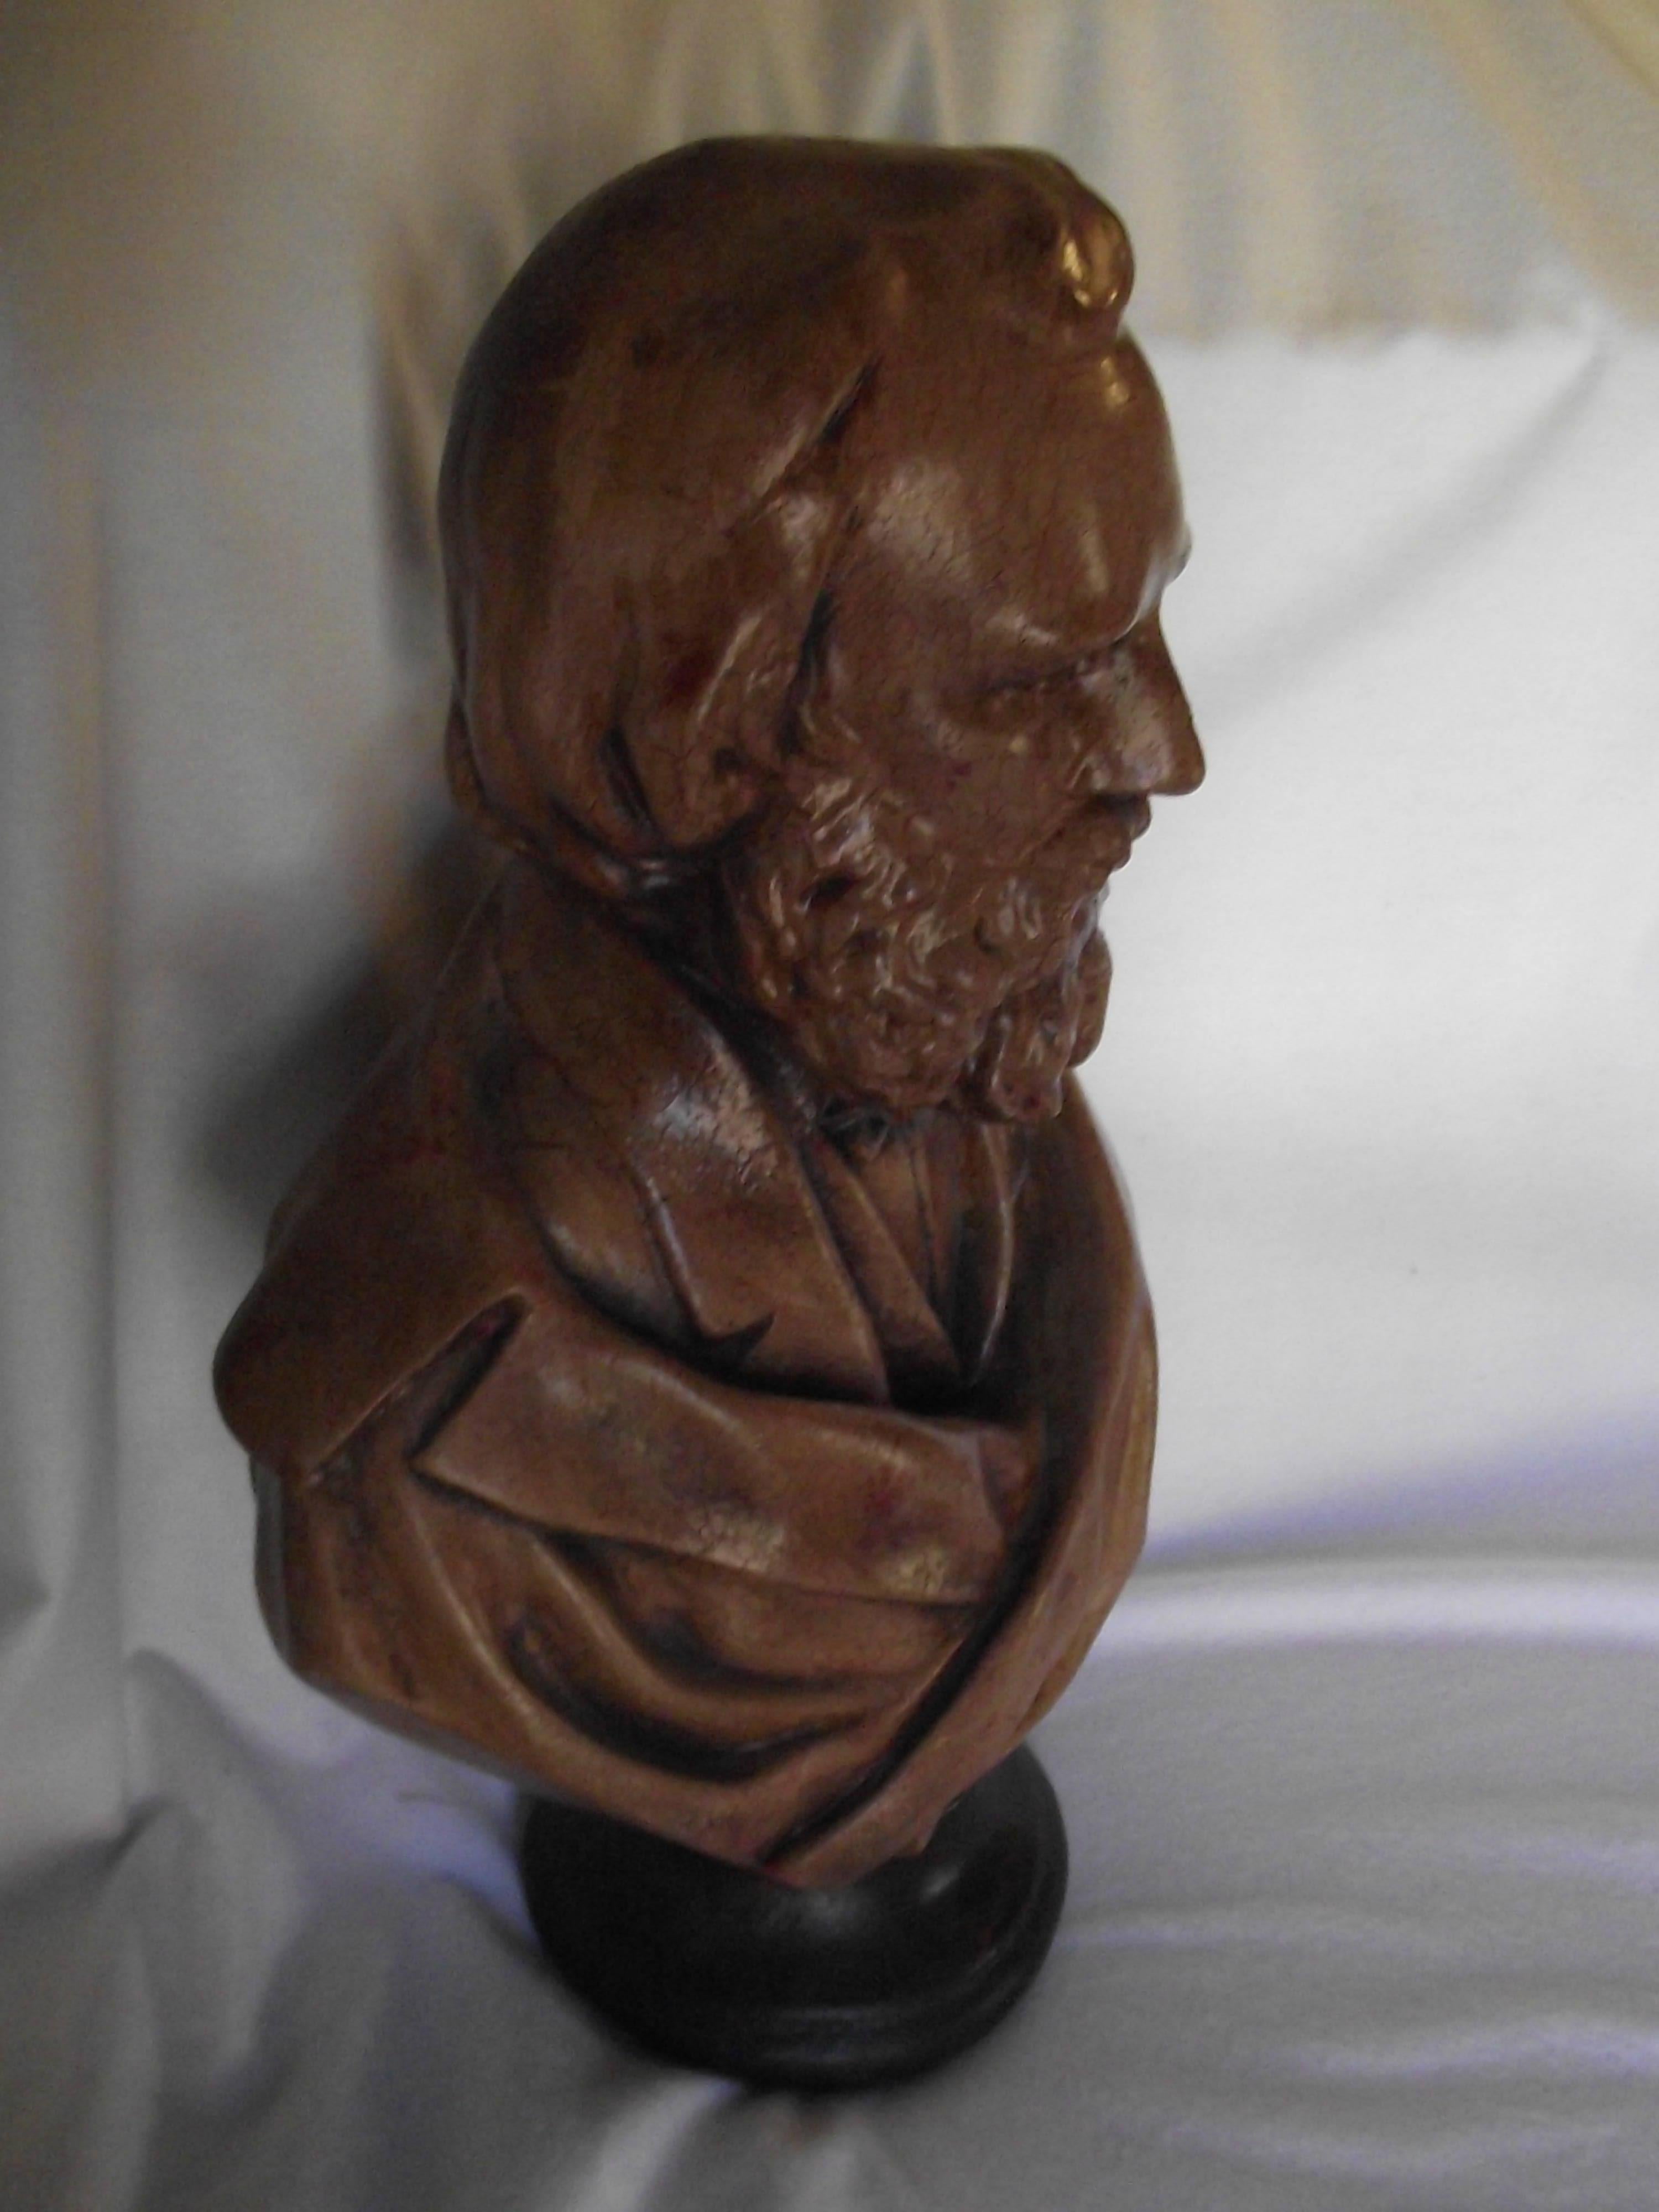 This bust is hand finished in  my studio in a beautiful multiple layer antique style.